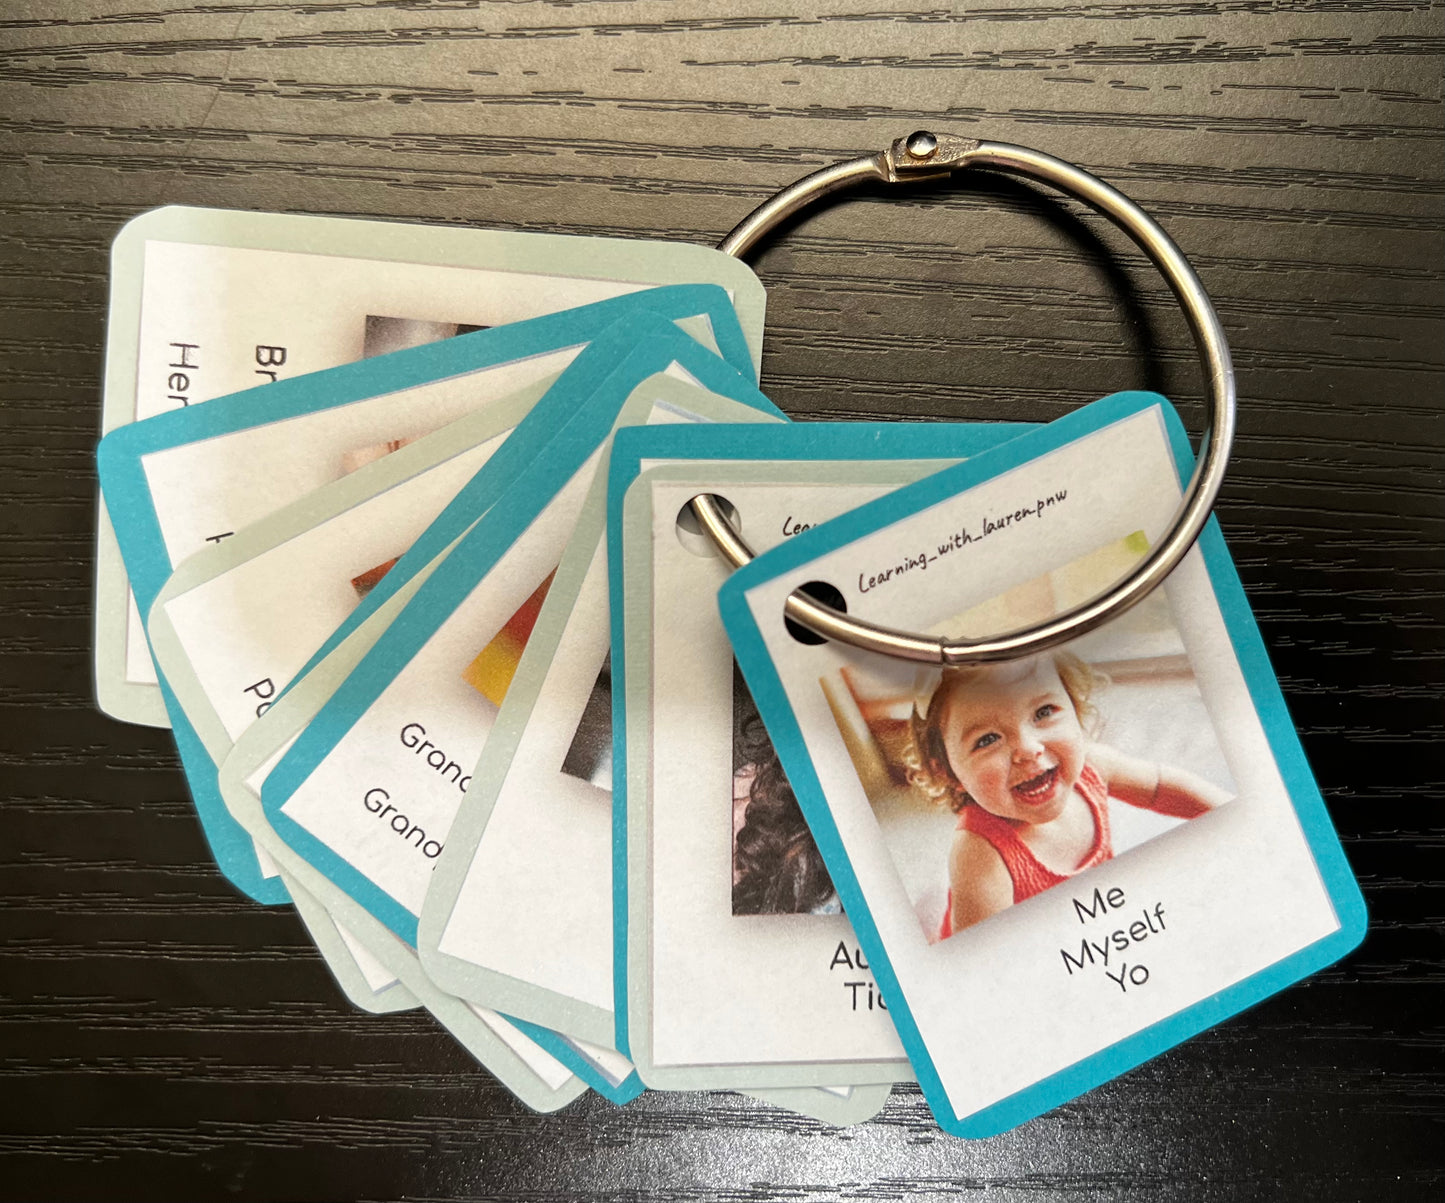 {Wallet} Flashcards ~ Family & Friends